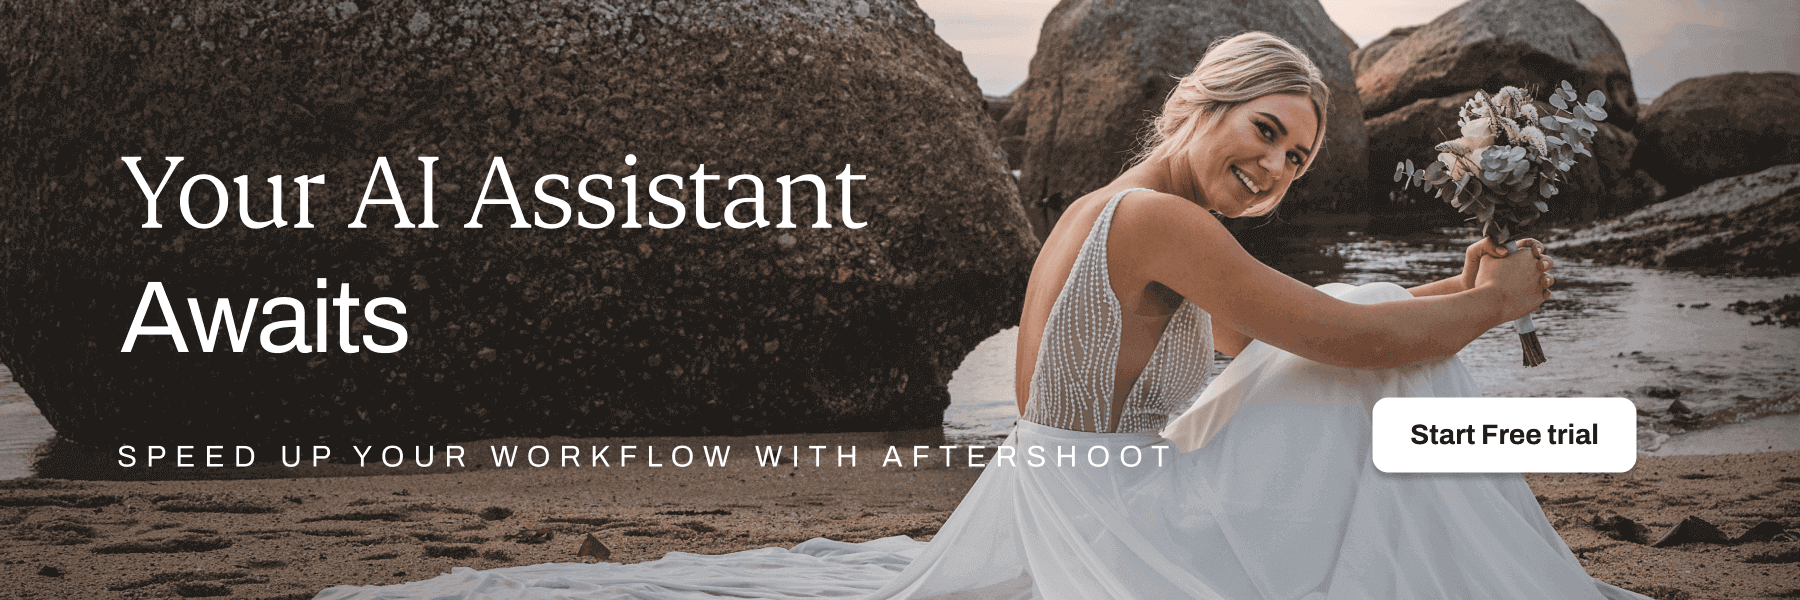 Aftershoot will speed up your wedding photography workflow after the shoot